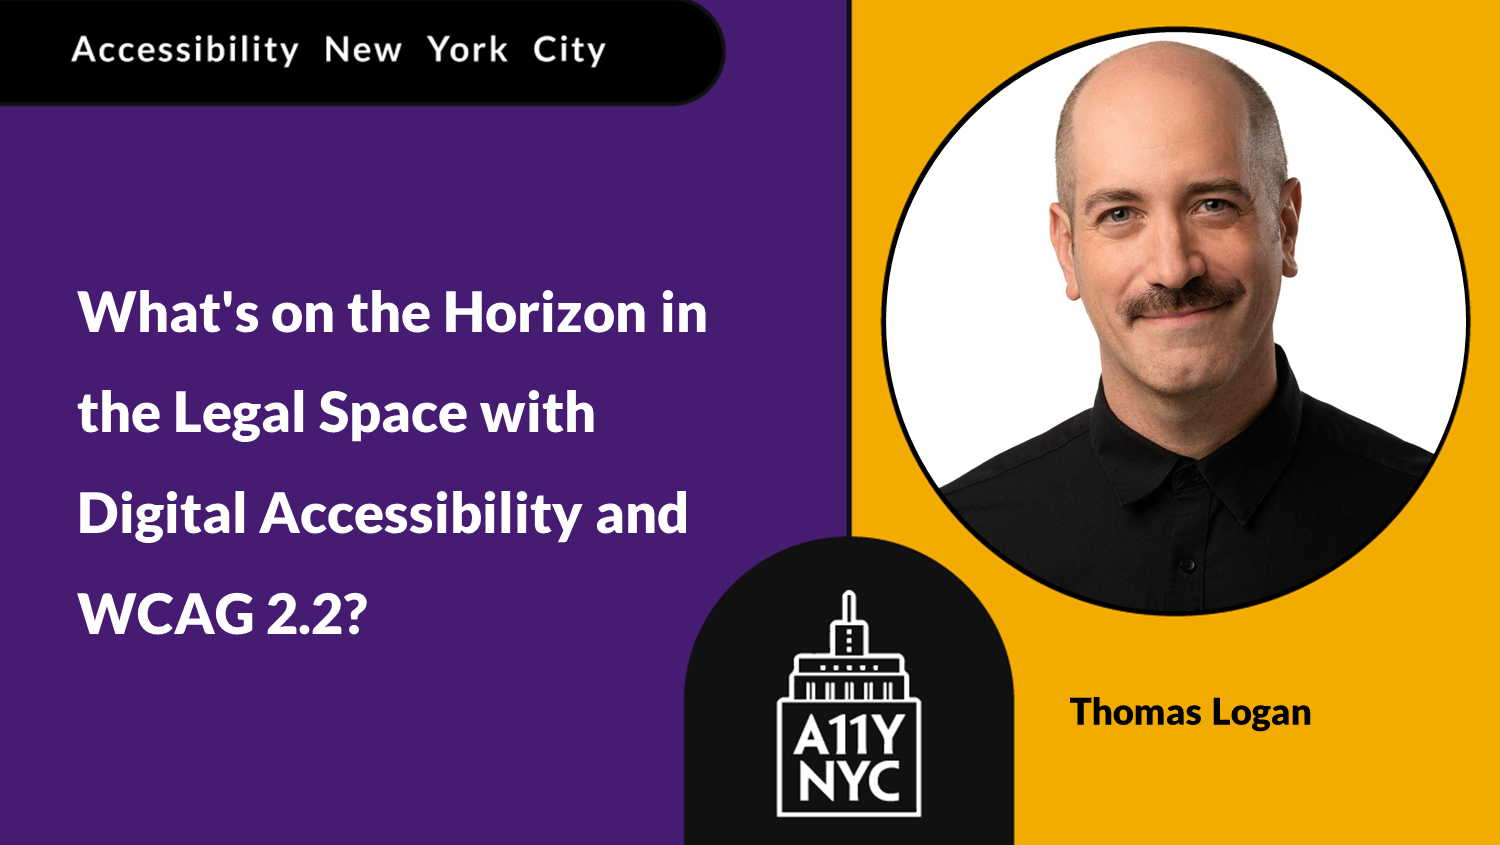 Accessibility New York City: What's on the Horizon in the Legal Space with Digital Accessibility and WCAG 2.2? Thomas Logan has a bald head with closely-shaven hair on the sides, mustache, and a dark collared shirt